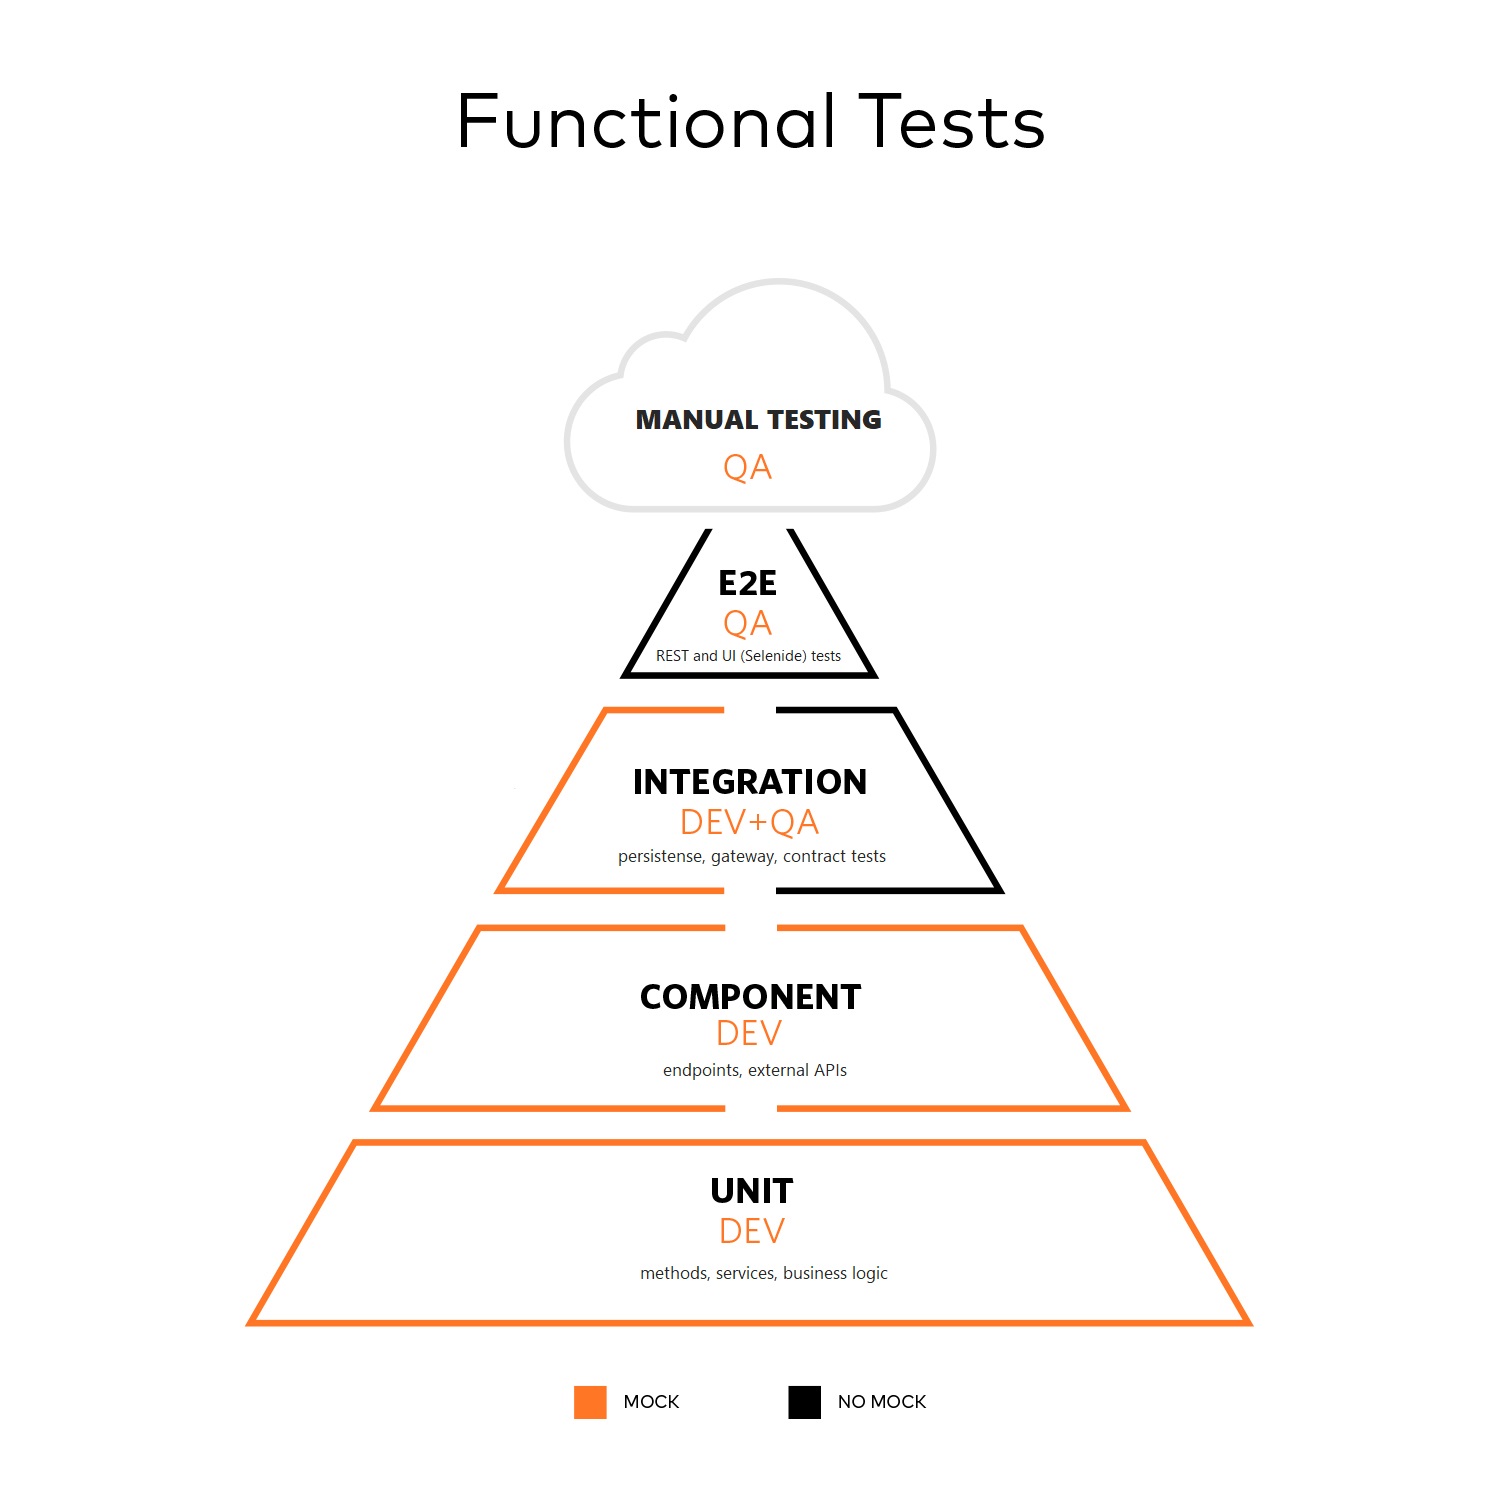 Functional Tests